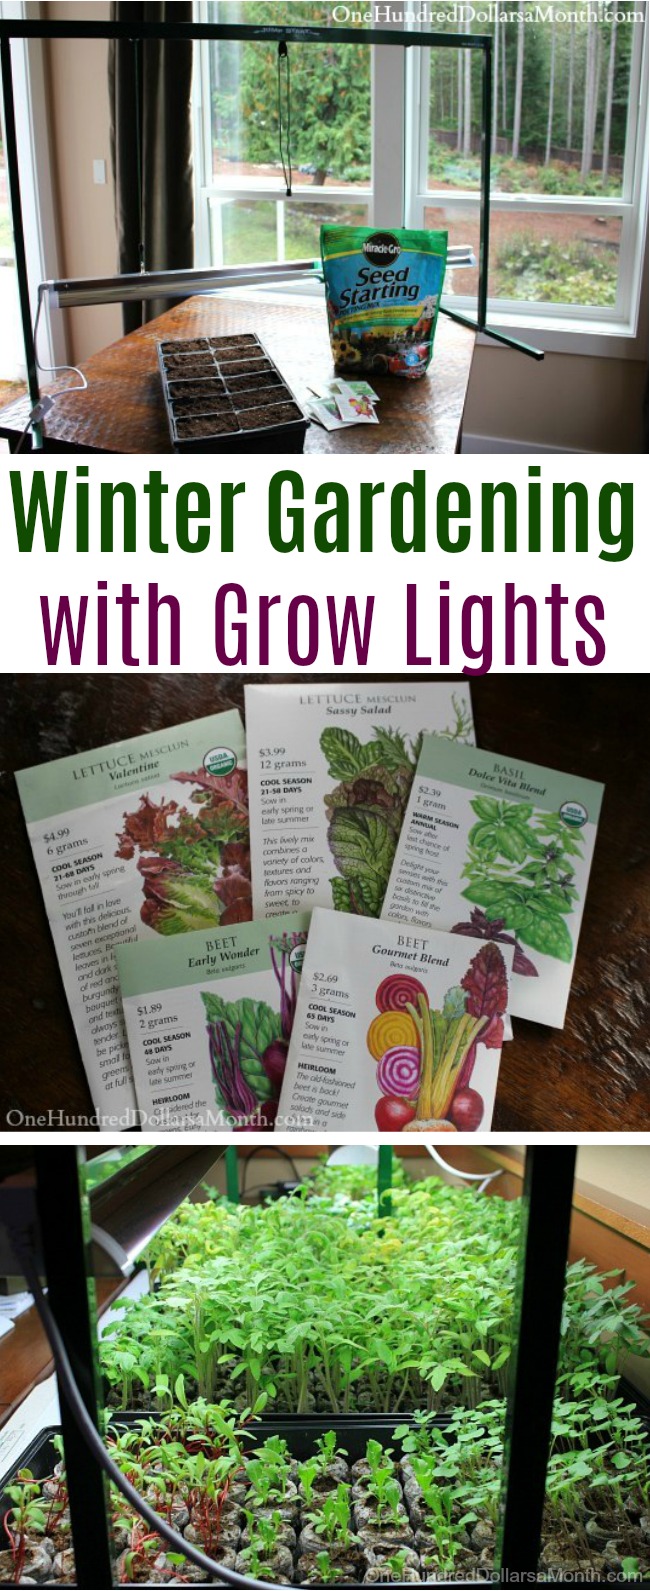 Winter Gardening with Grow Lights – Lettuce, Basil and Beets